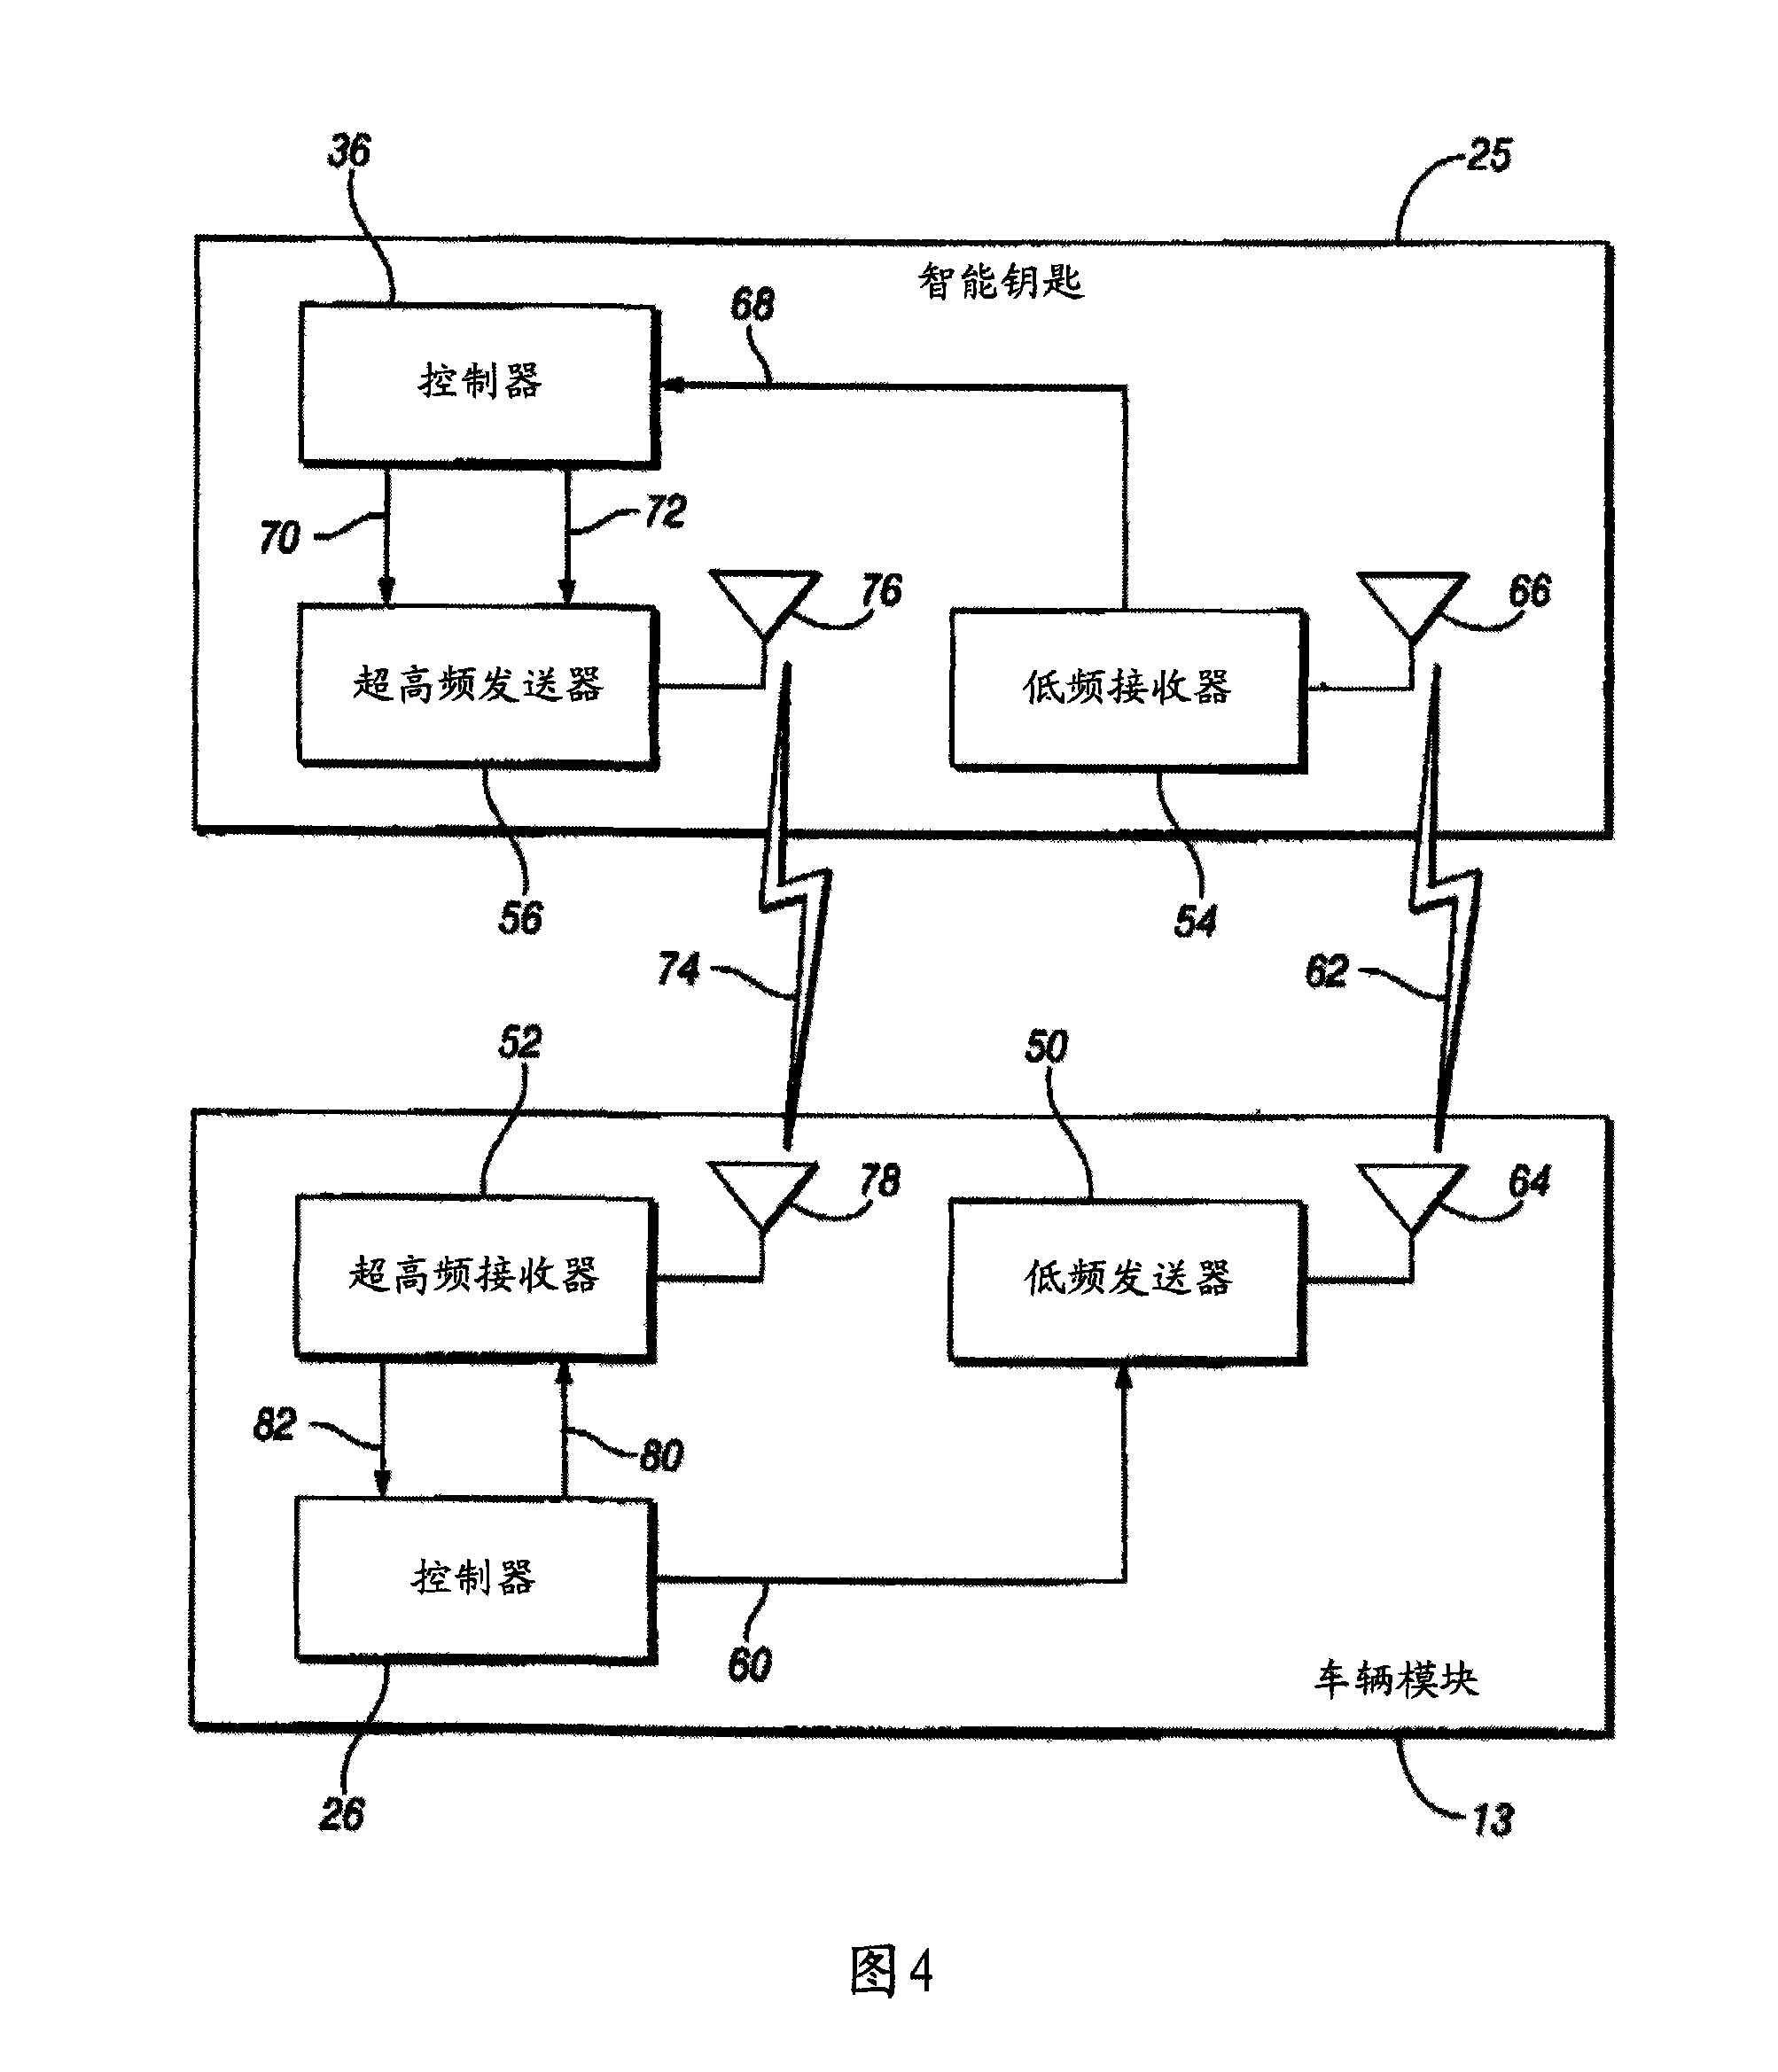 Frequency selection in system for remote activation of vehicle functions